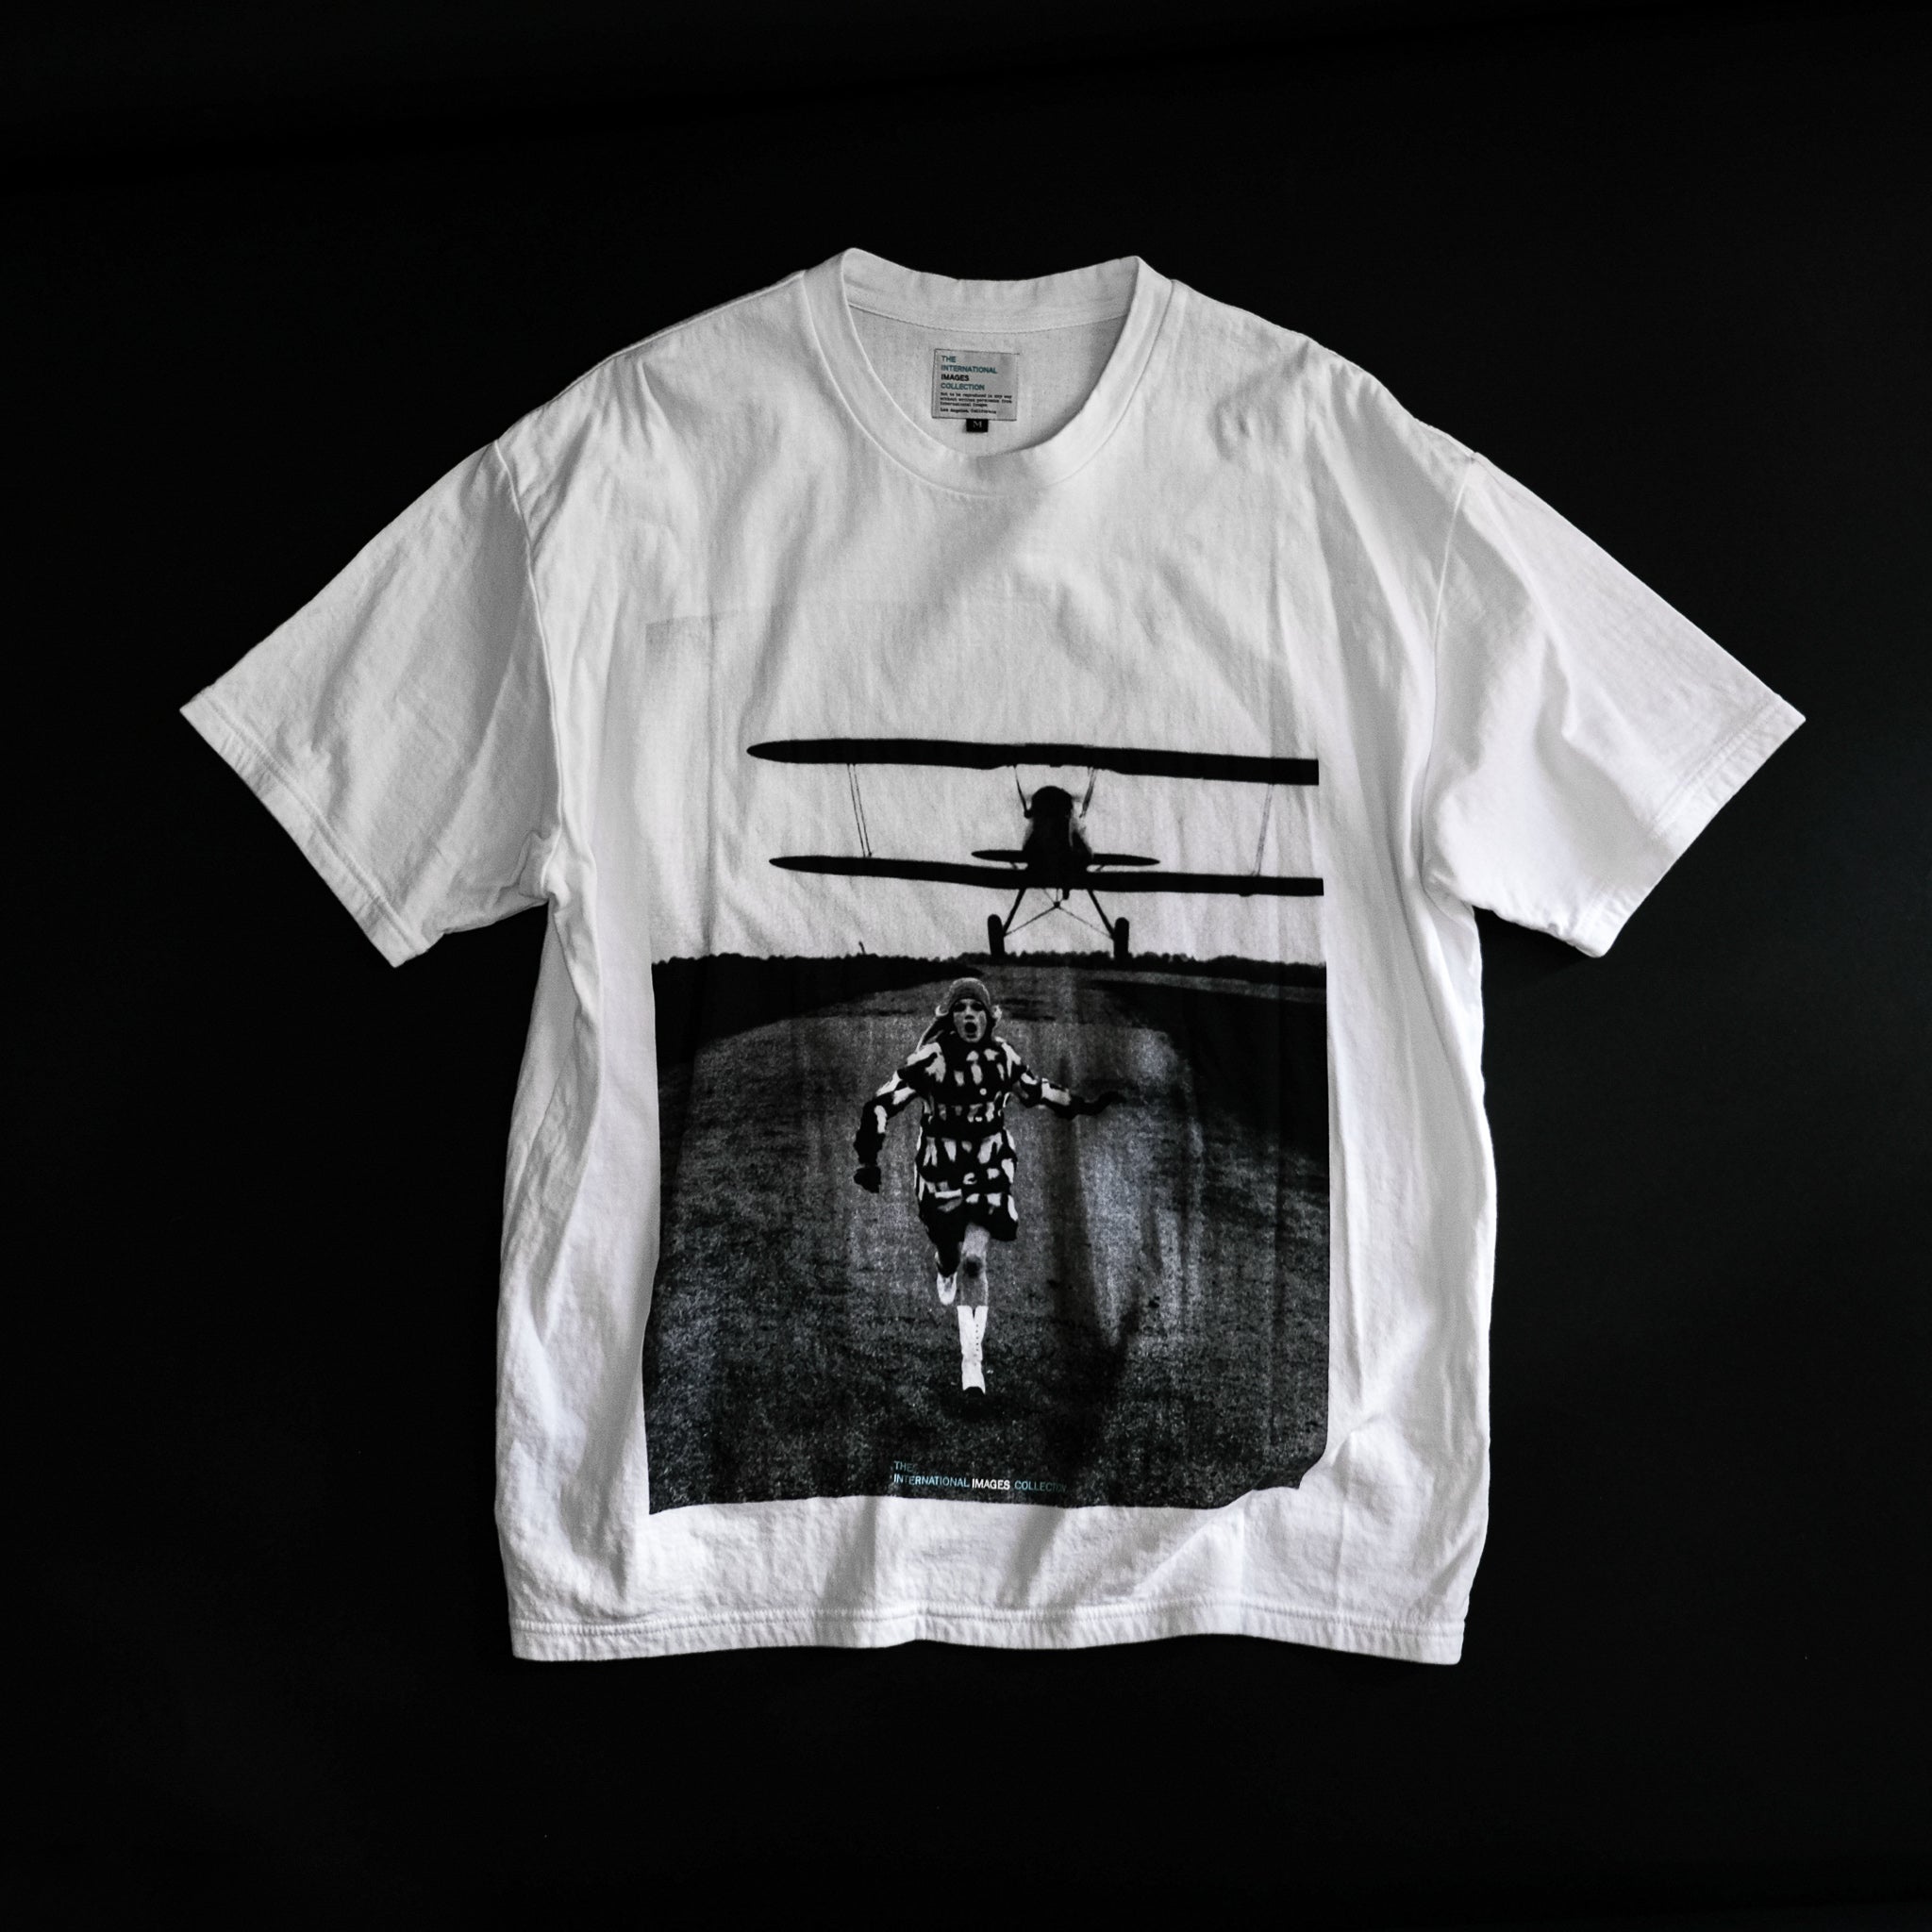 INTERNATIONAL IMAGES COLLECTION / GRAPHIC T-SHIRT (PLANE)